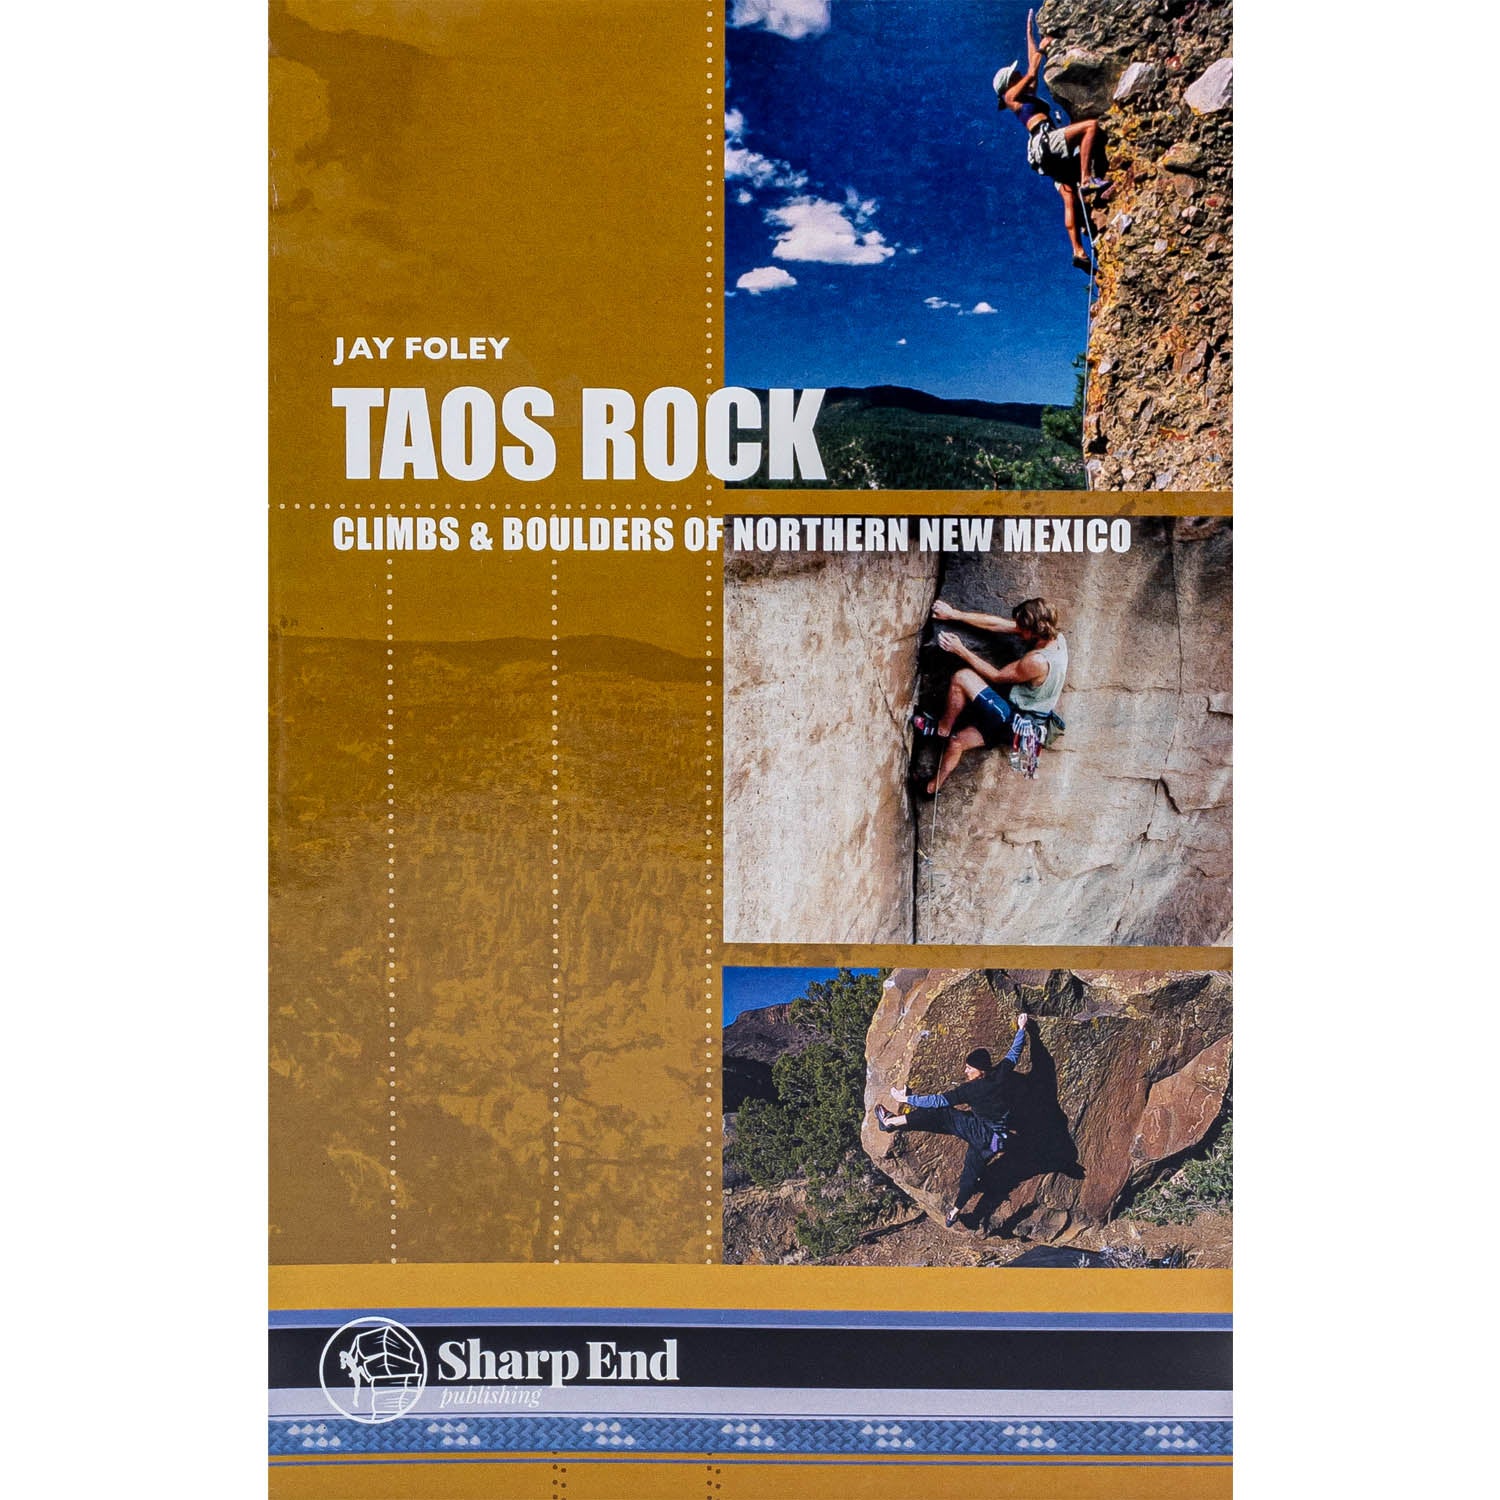 Taos Rock: Climbs & Boulders of Northern New Mexico